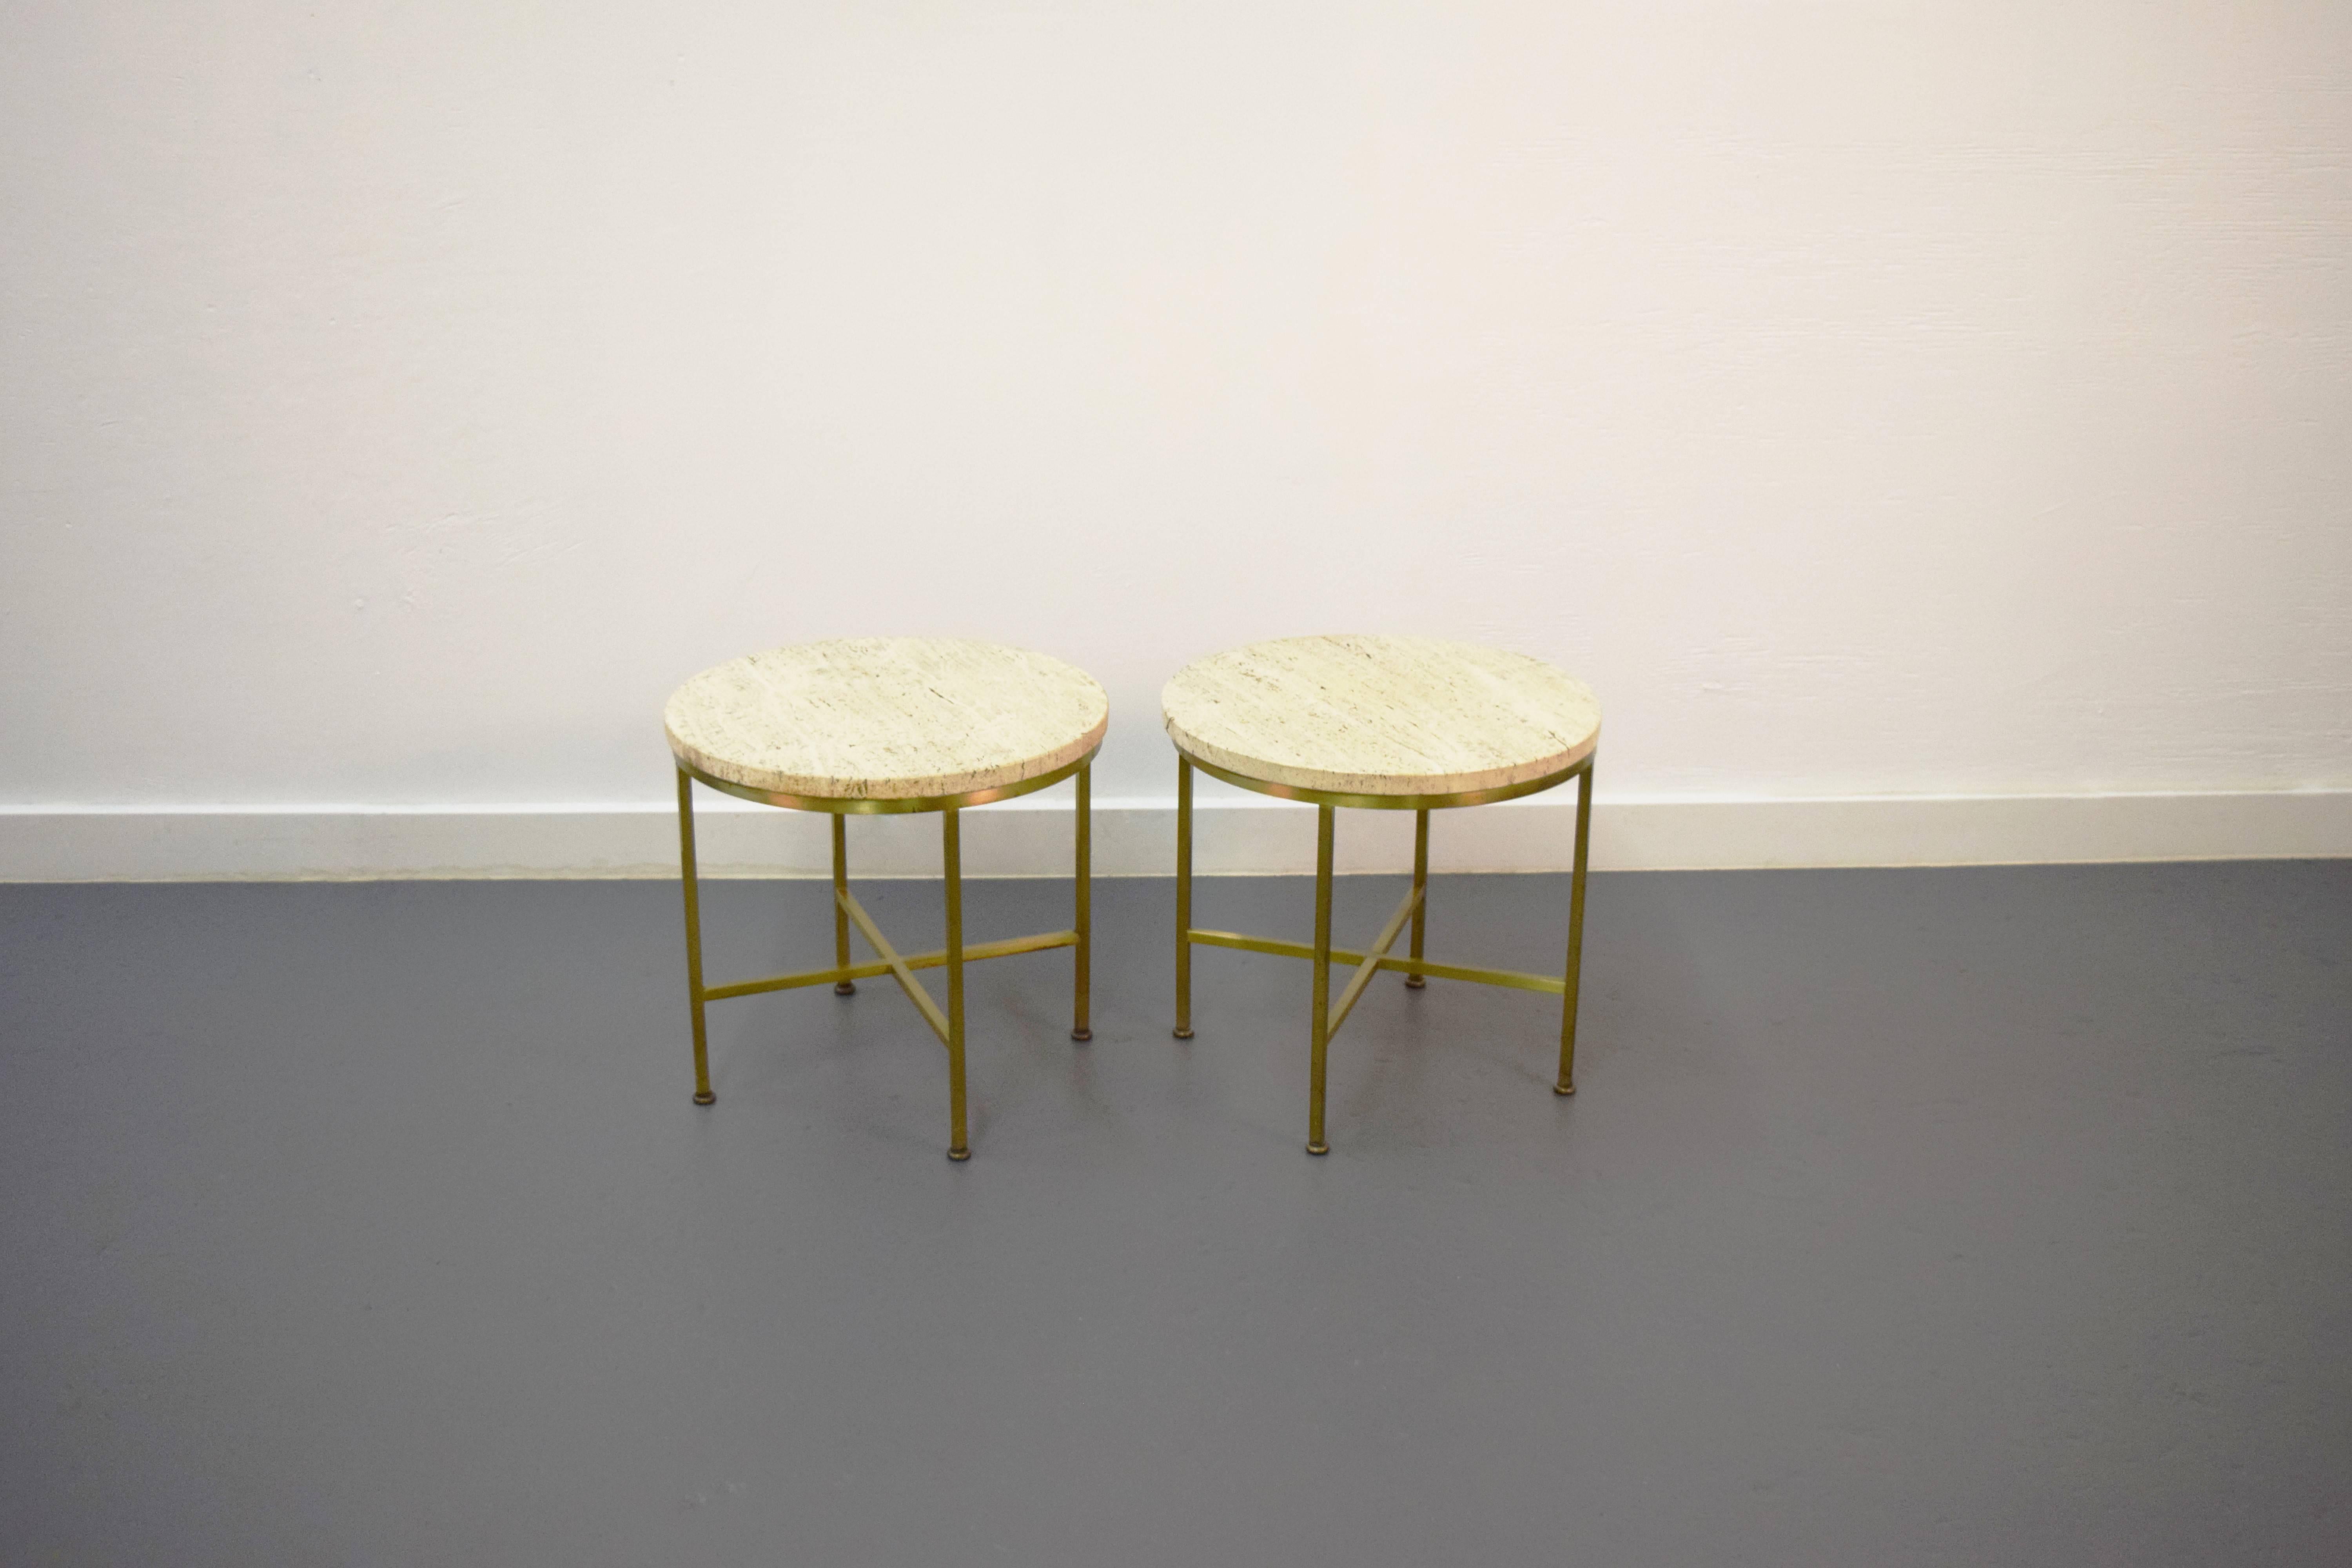 20th Century Travertine and Brass Occasional Tables by Paul McCobb for Directional 